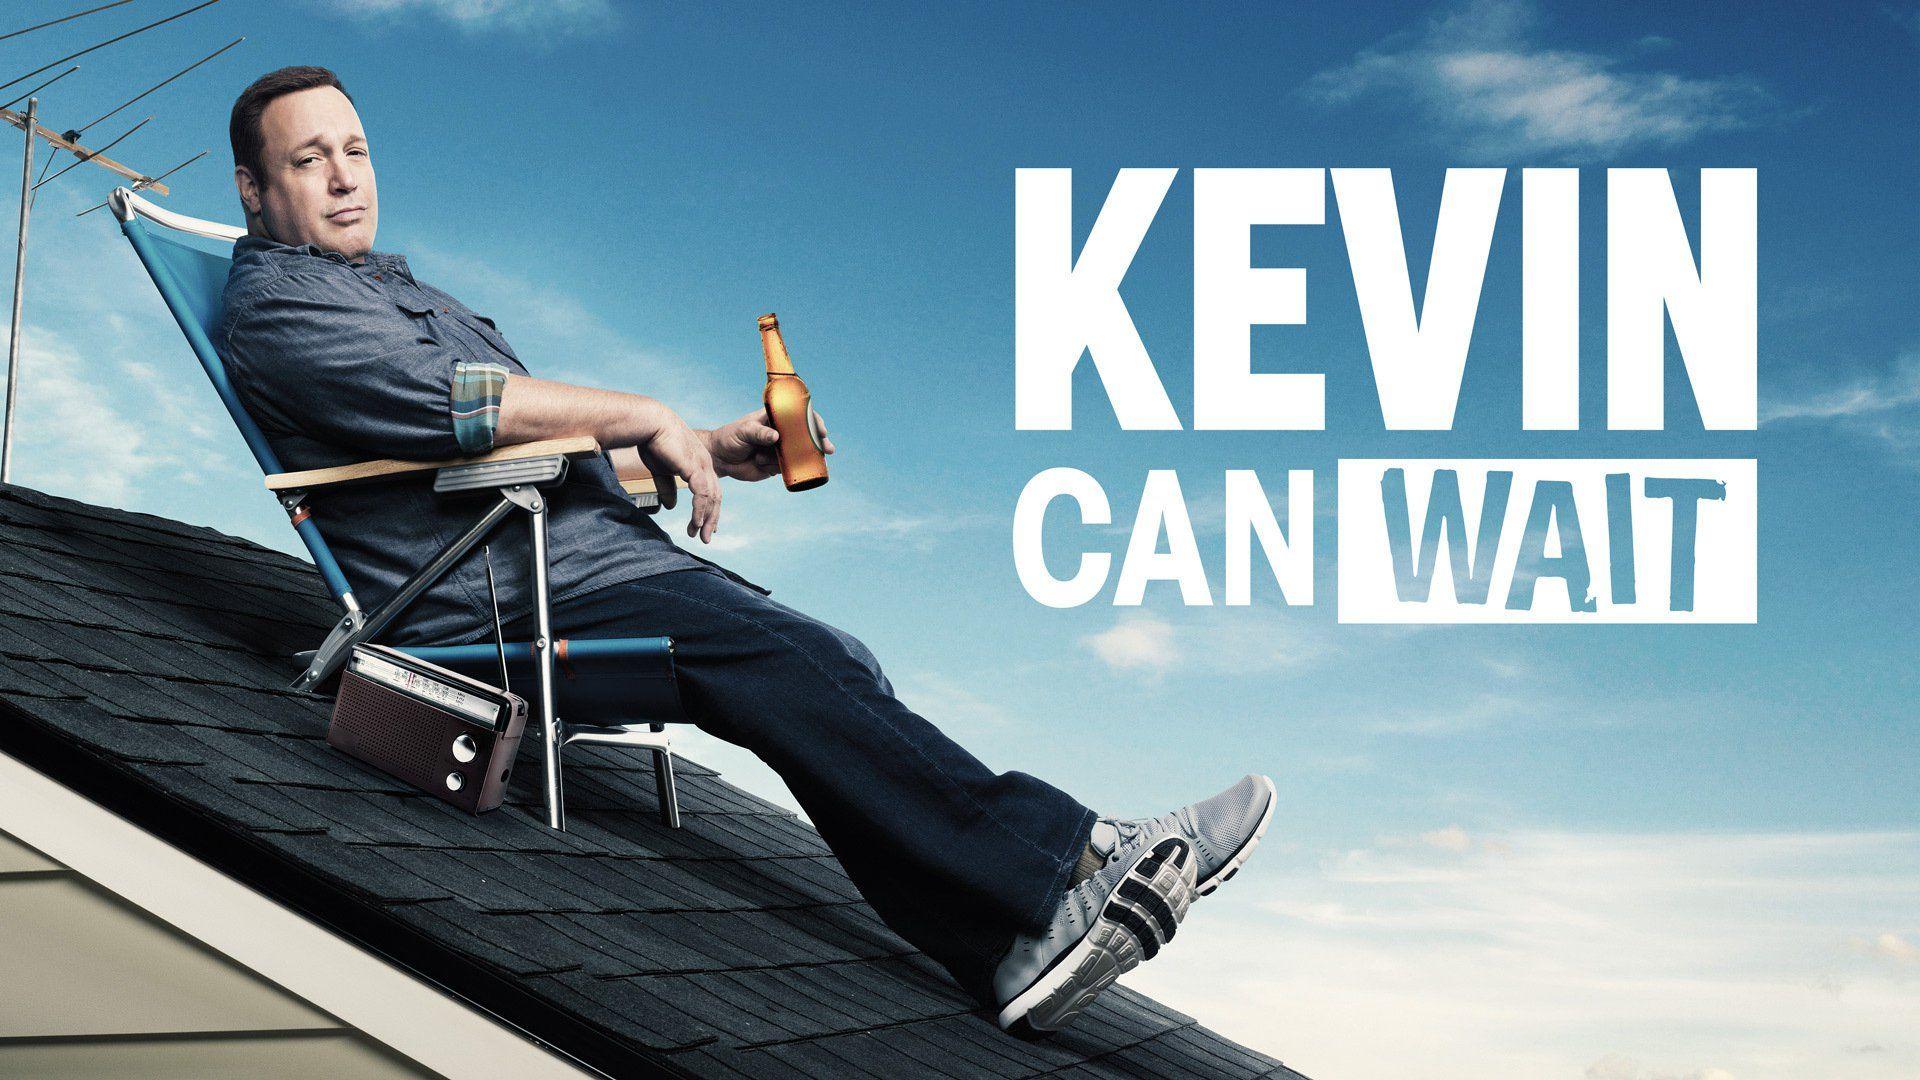 Kevin can wait.